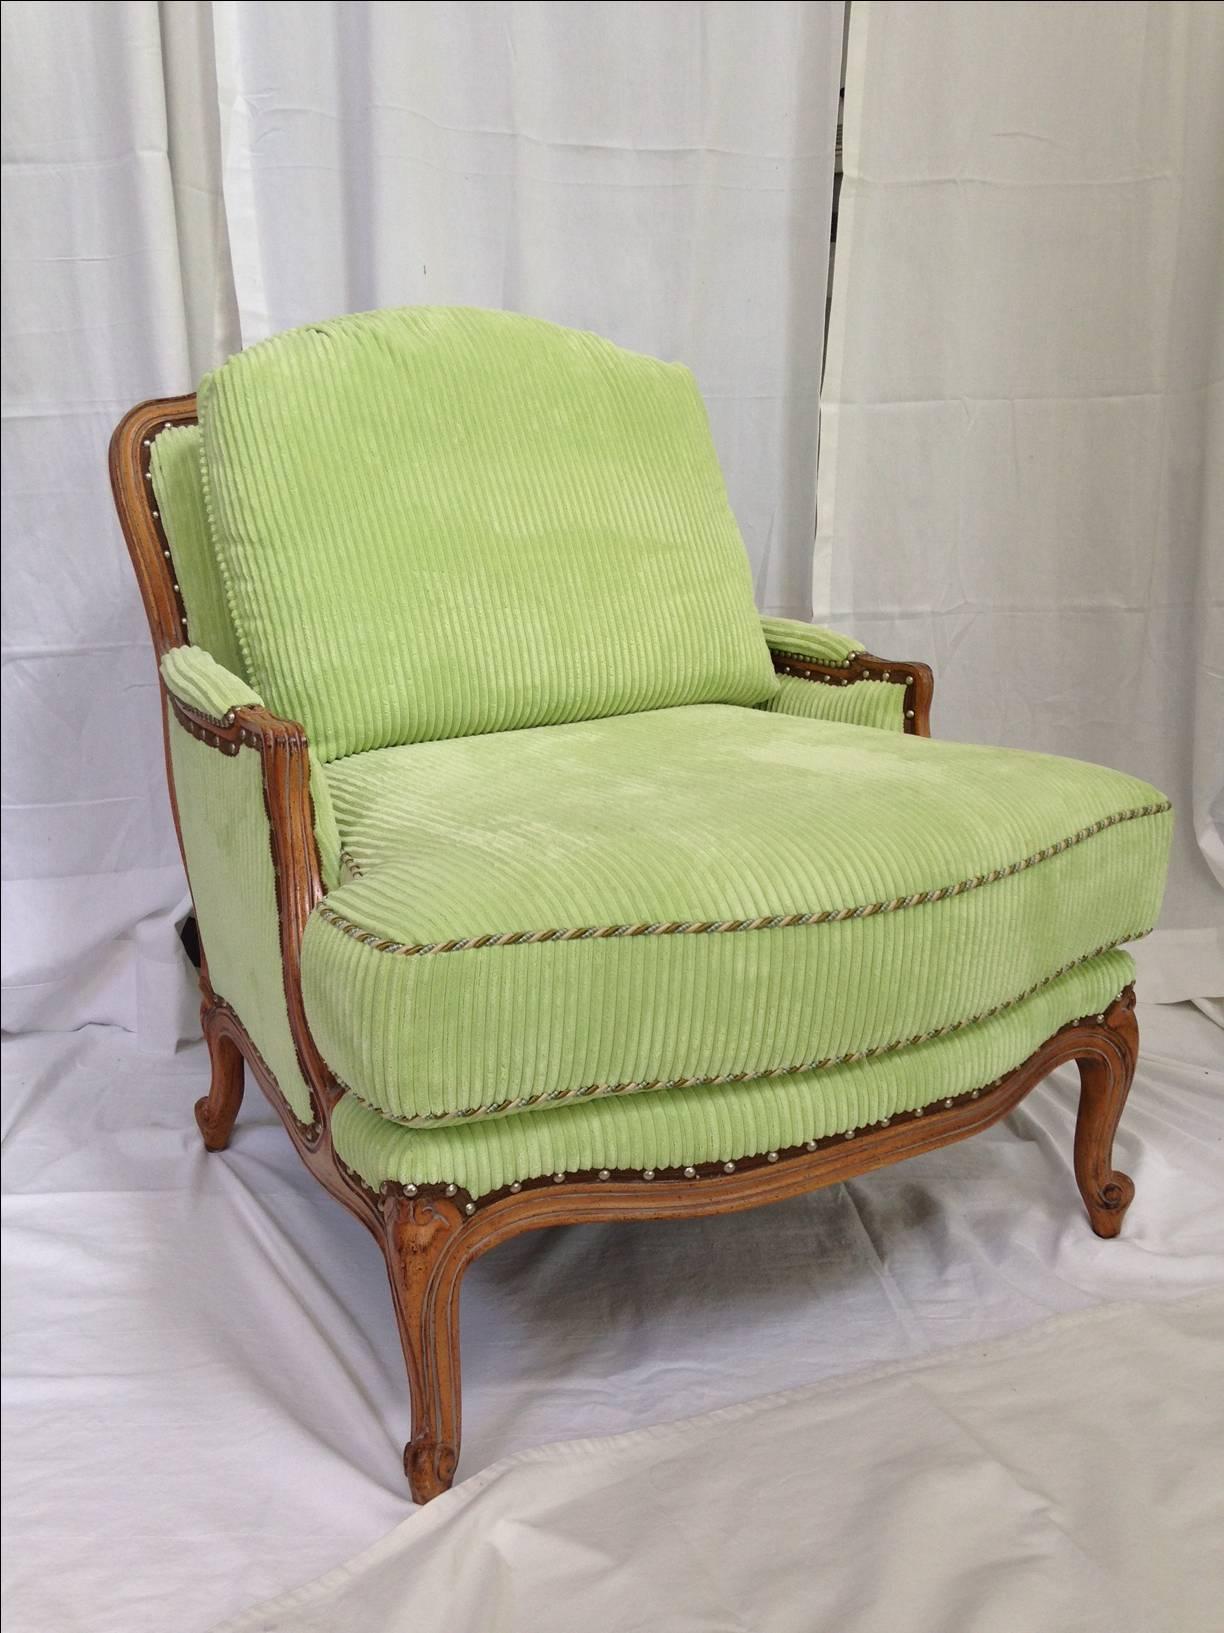 Bergère club chair and ottoman by Taylor King. Custom upholstered in a velvety soft ribbed chenille in a soft green. Excellent condition.

Dimensions: 33